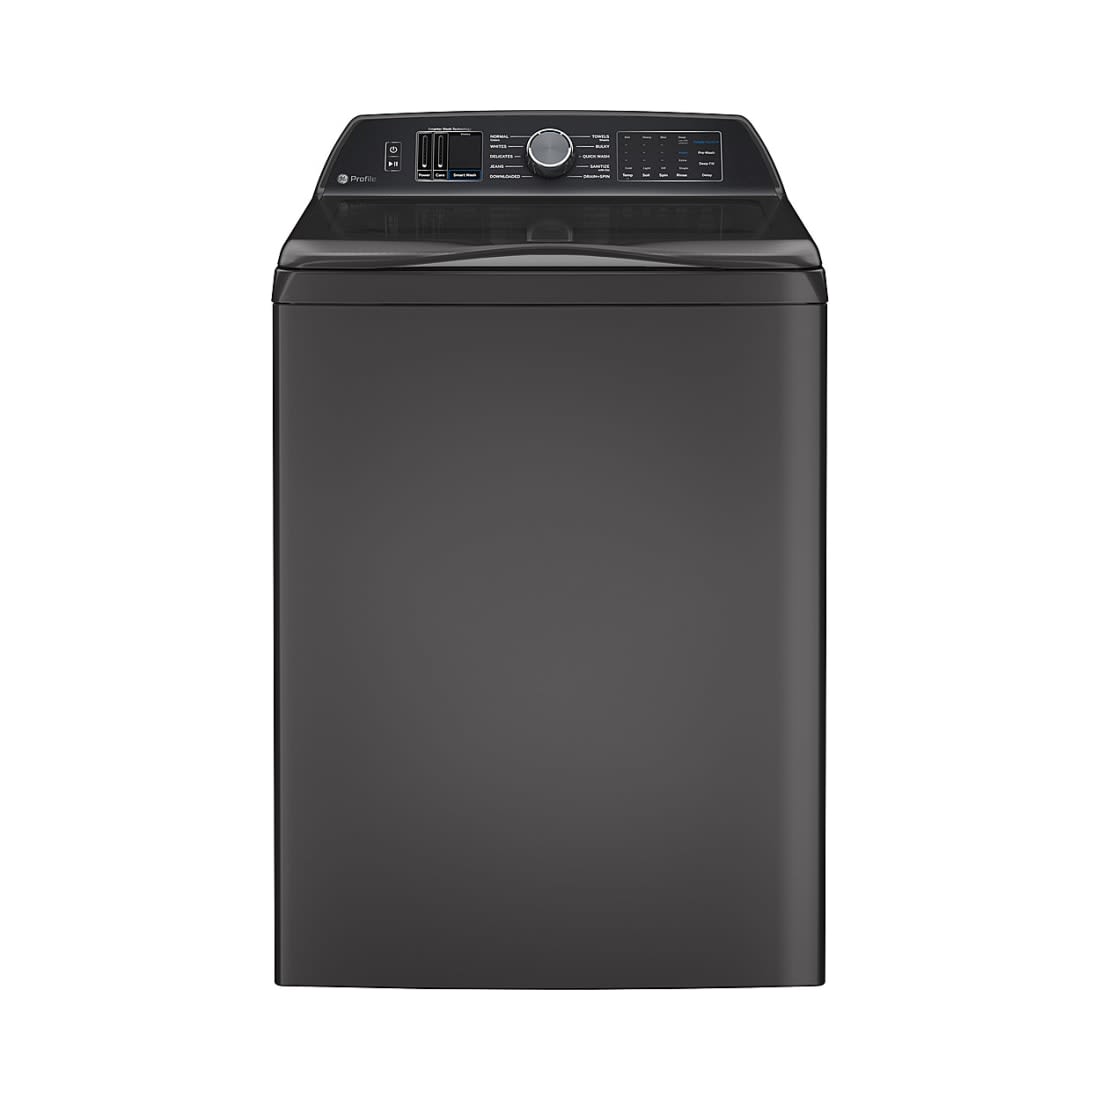 GE Profile 5.0 cu. ft. Capacity Washer with Smarter Wash Technology and